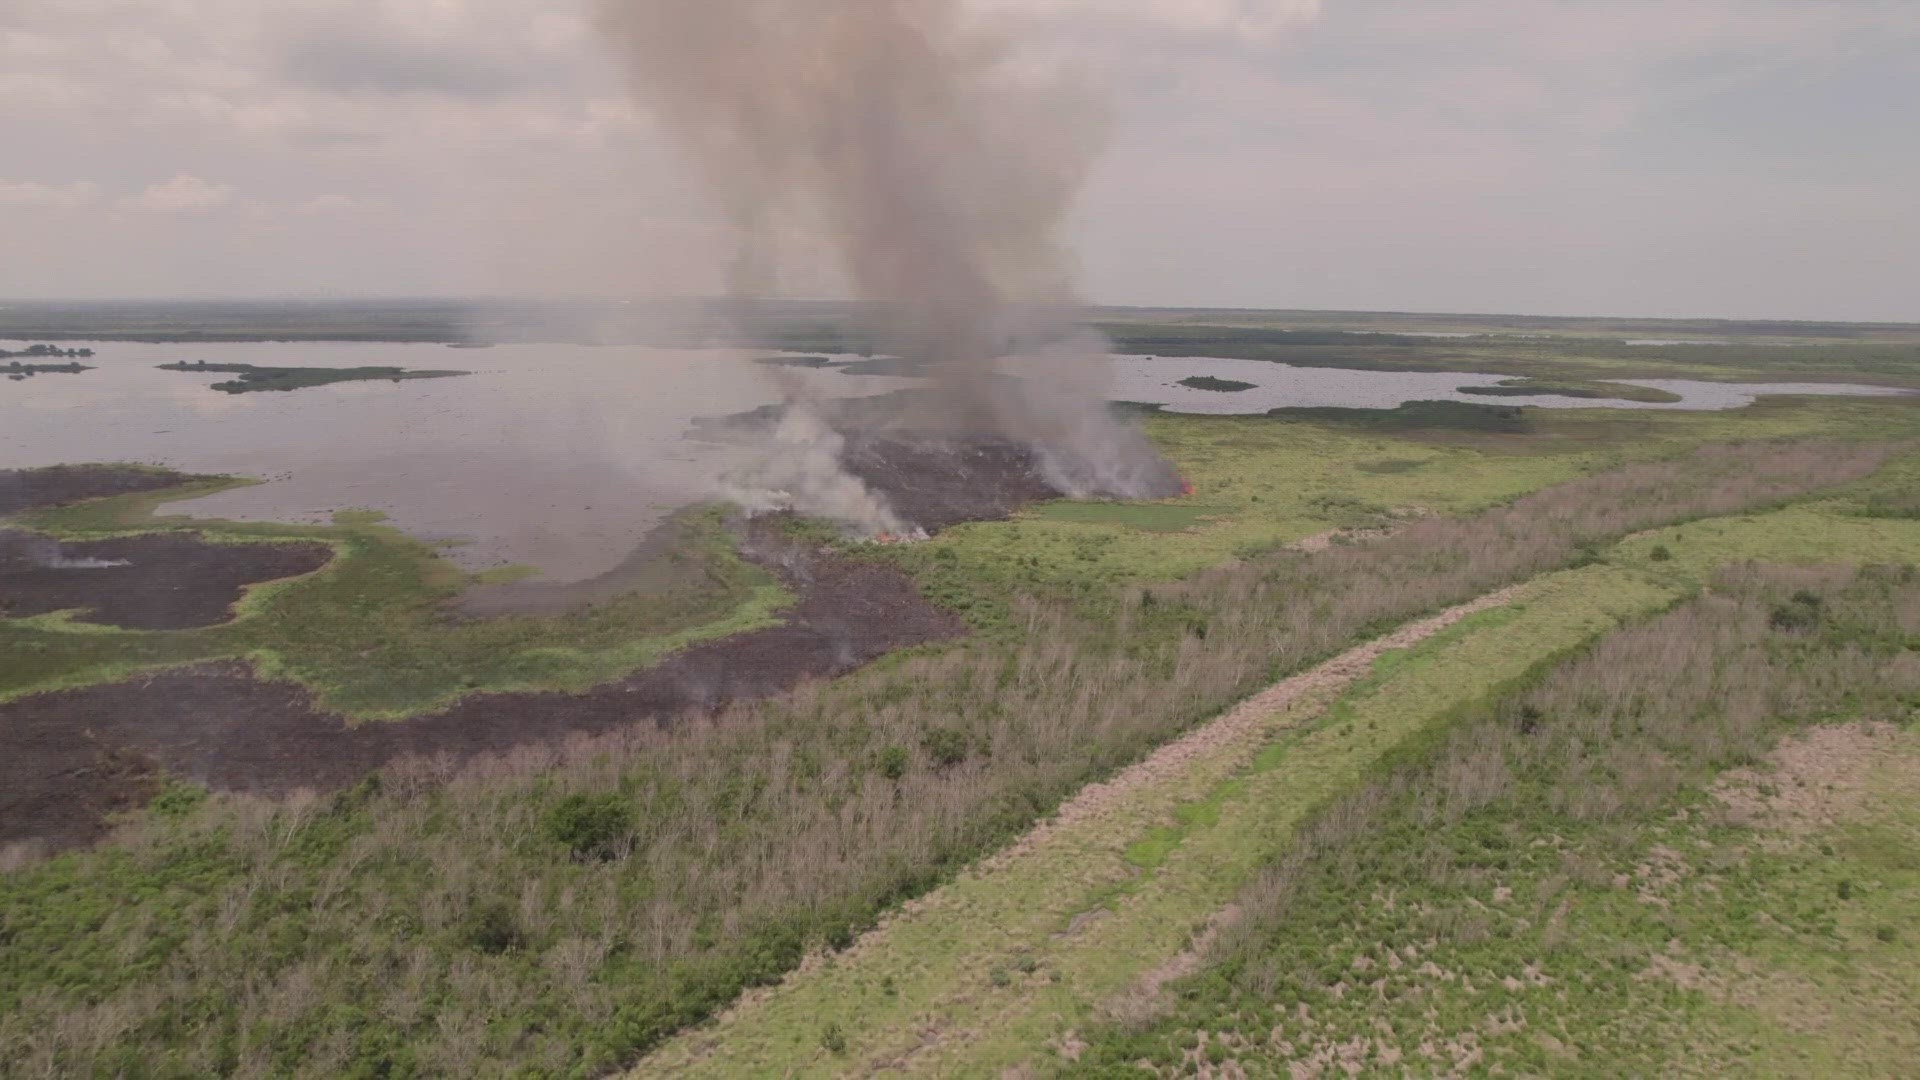 Wildfires burned more than 400 acres of land at the bayou sauvage urban national wildlife refuge in new orleans east.